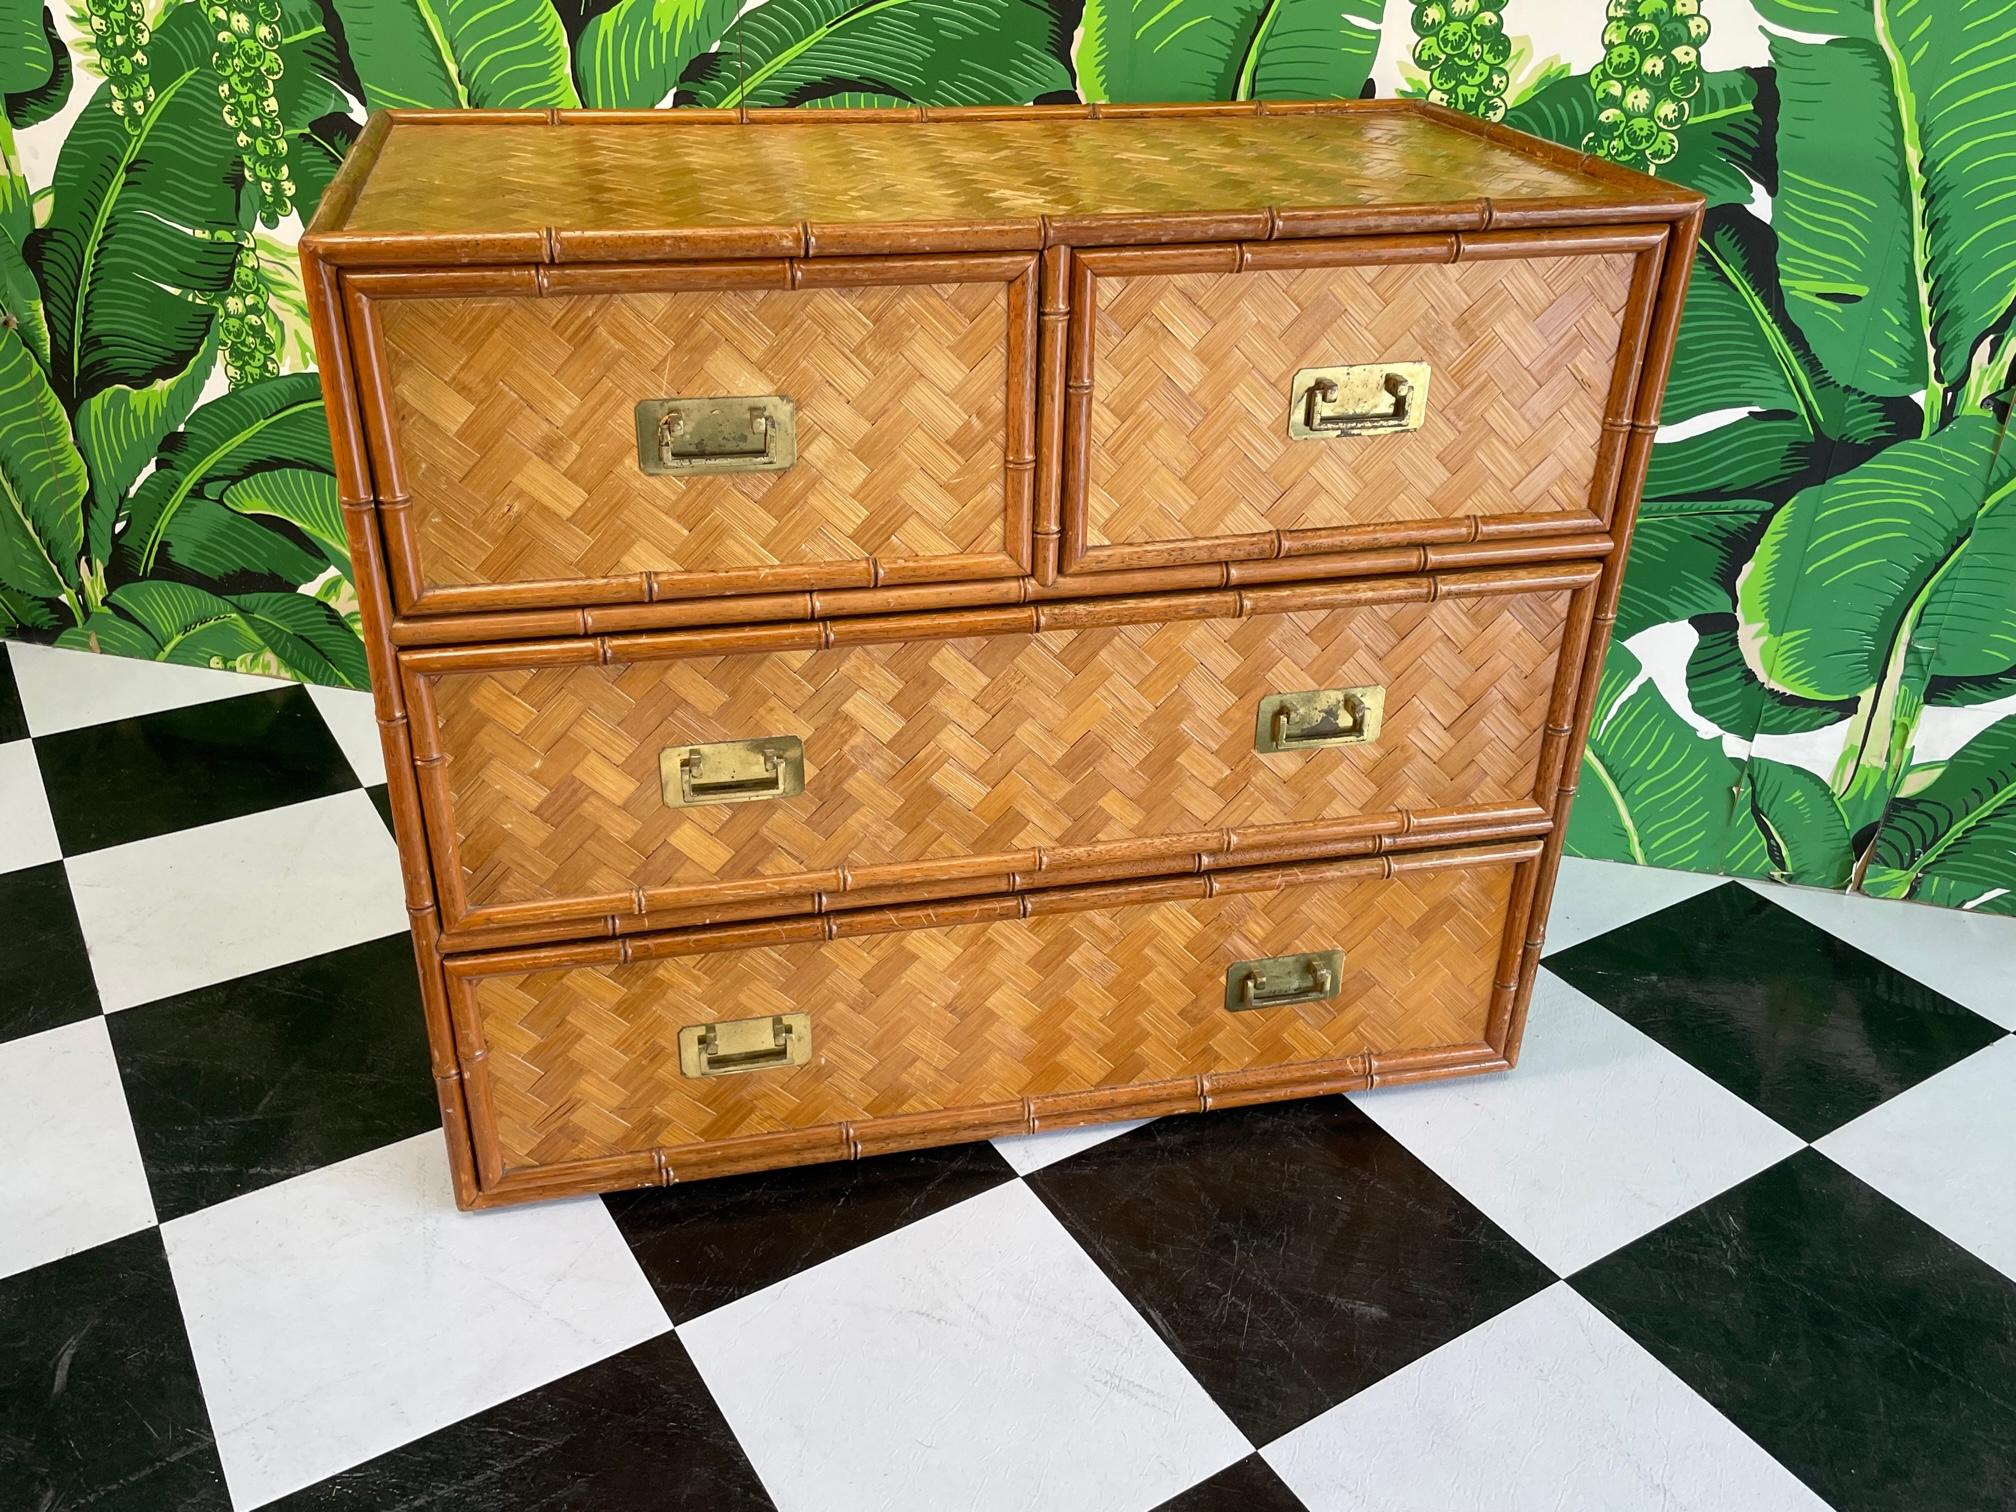 Faux bamboo four drawer dresser with full basketweave cane veneer. Brass campaign style hardware. Good vintage condition with imperfections consistent with age, see photos for condition details.
For a shipping quote to your exact zip code, please